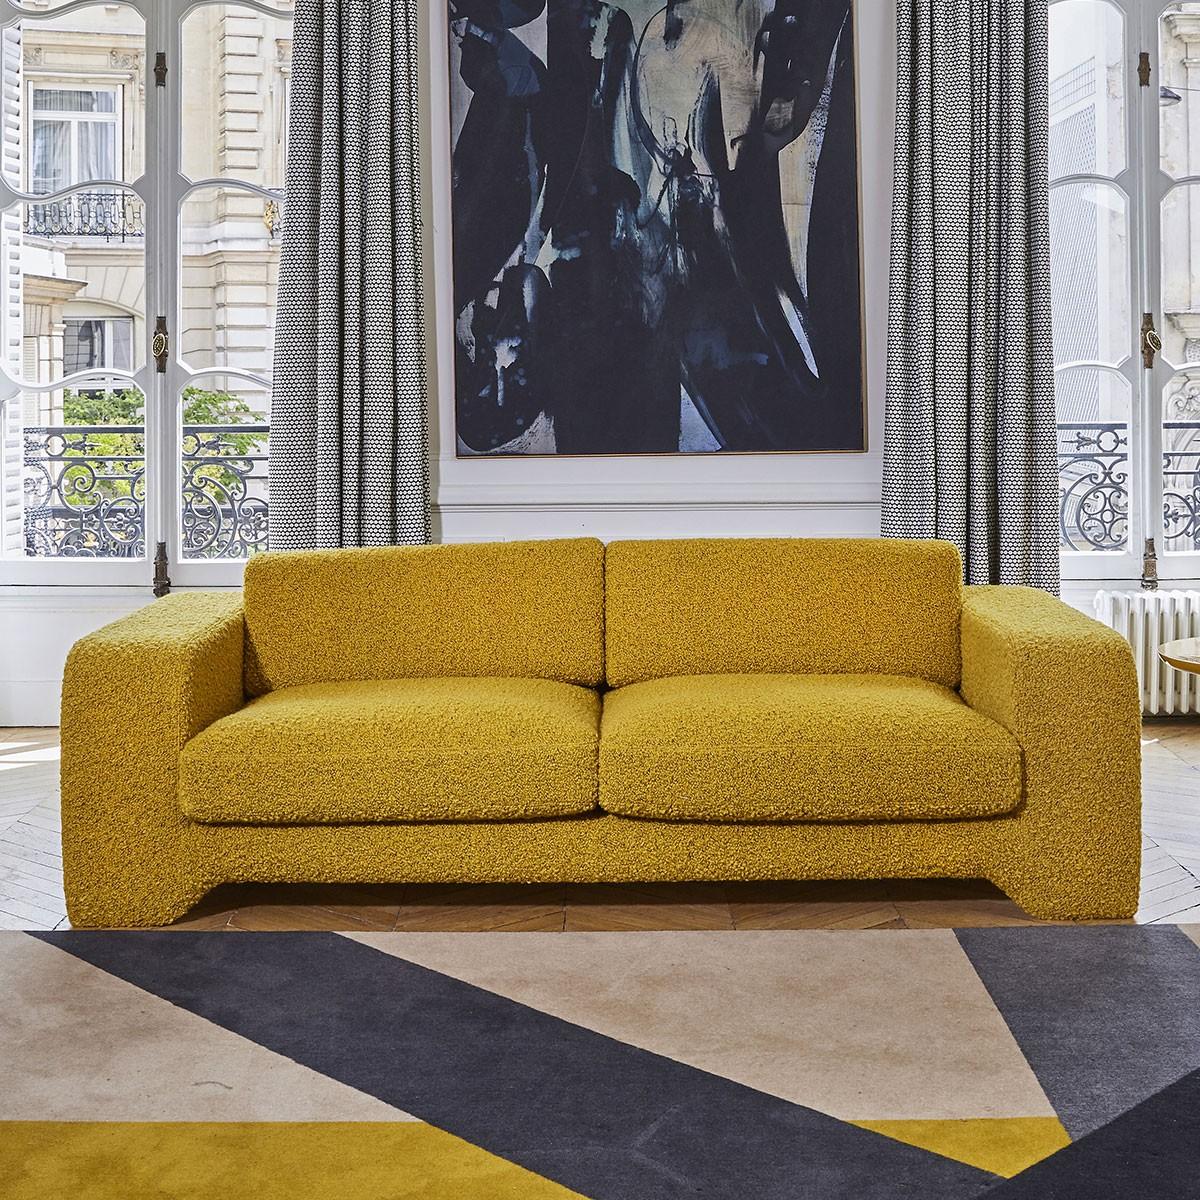 Popus Editions Giovanna 2.5 seater sofa in gray antwerp linen upholstery

Giovanna is a sofa with a strong profile. A sober, plush line, with this famous detail that changes everything, so as not to forget its strength of character and this